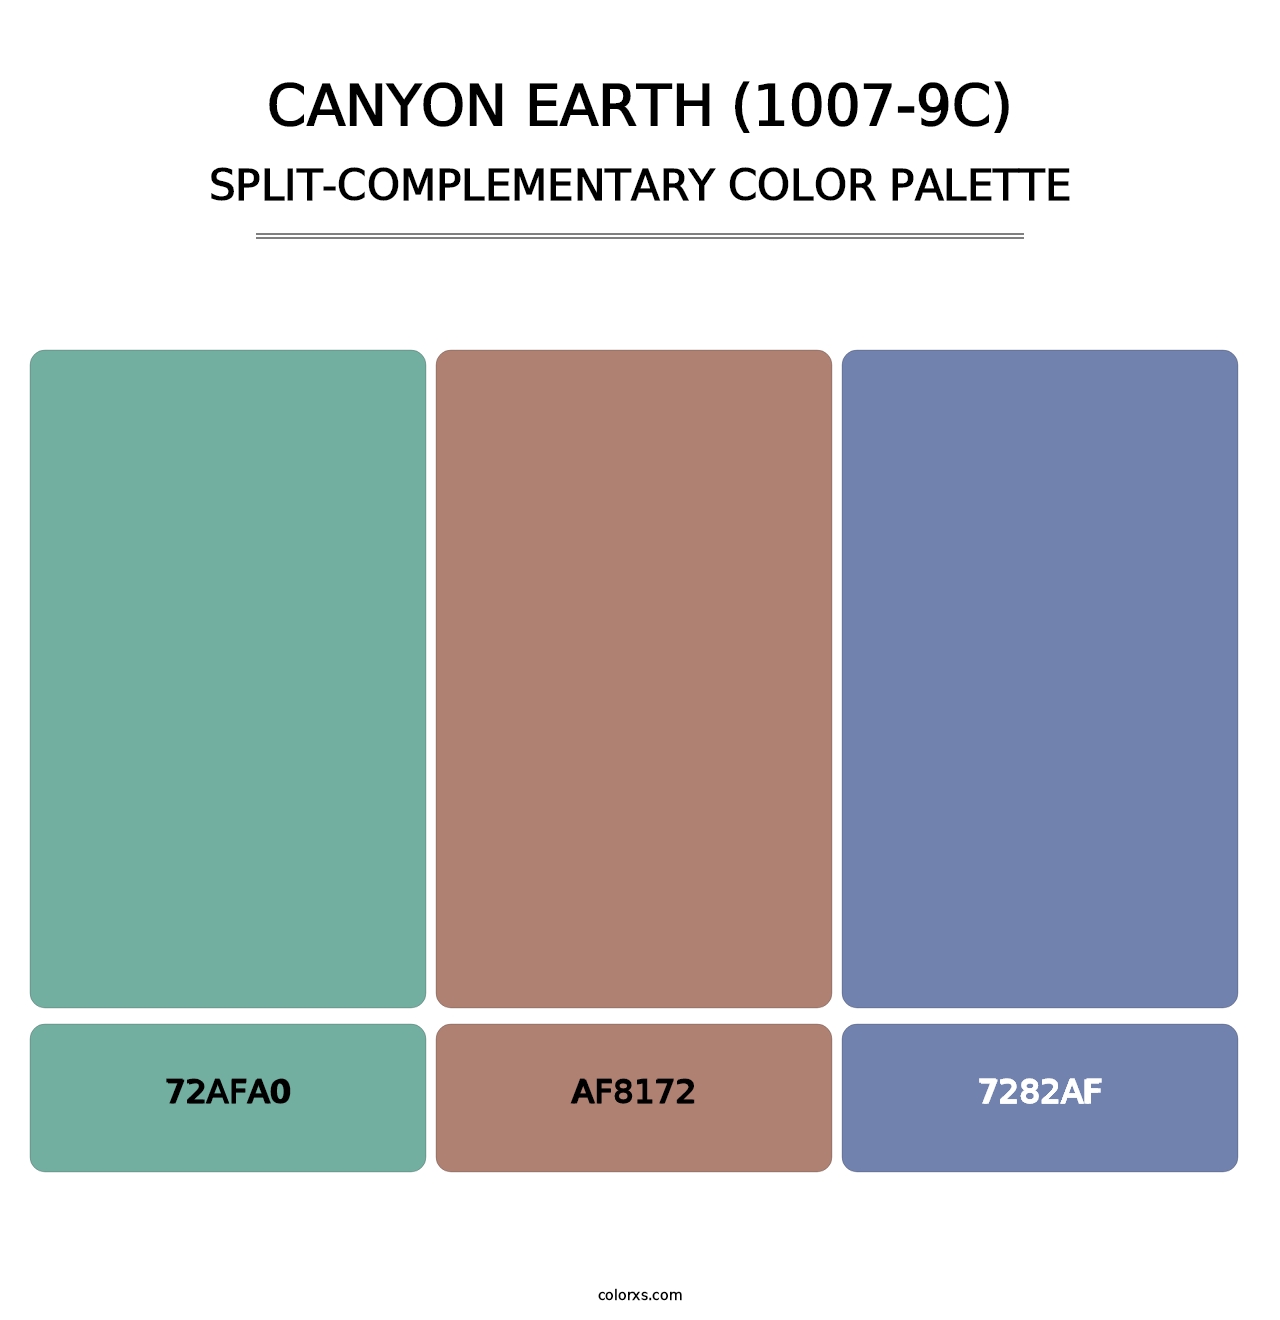 Canyon Earth (1007-9C) - Split-Complementary Color Palette